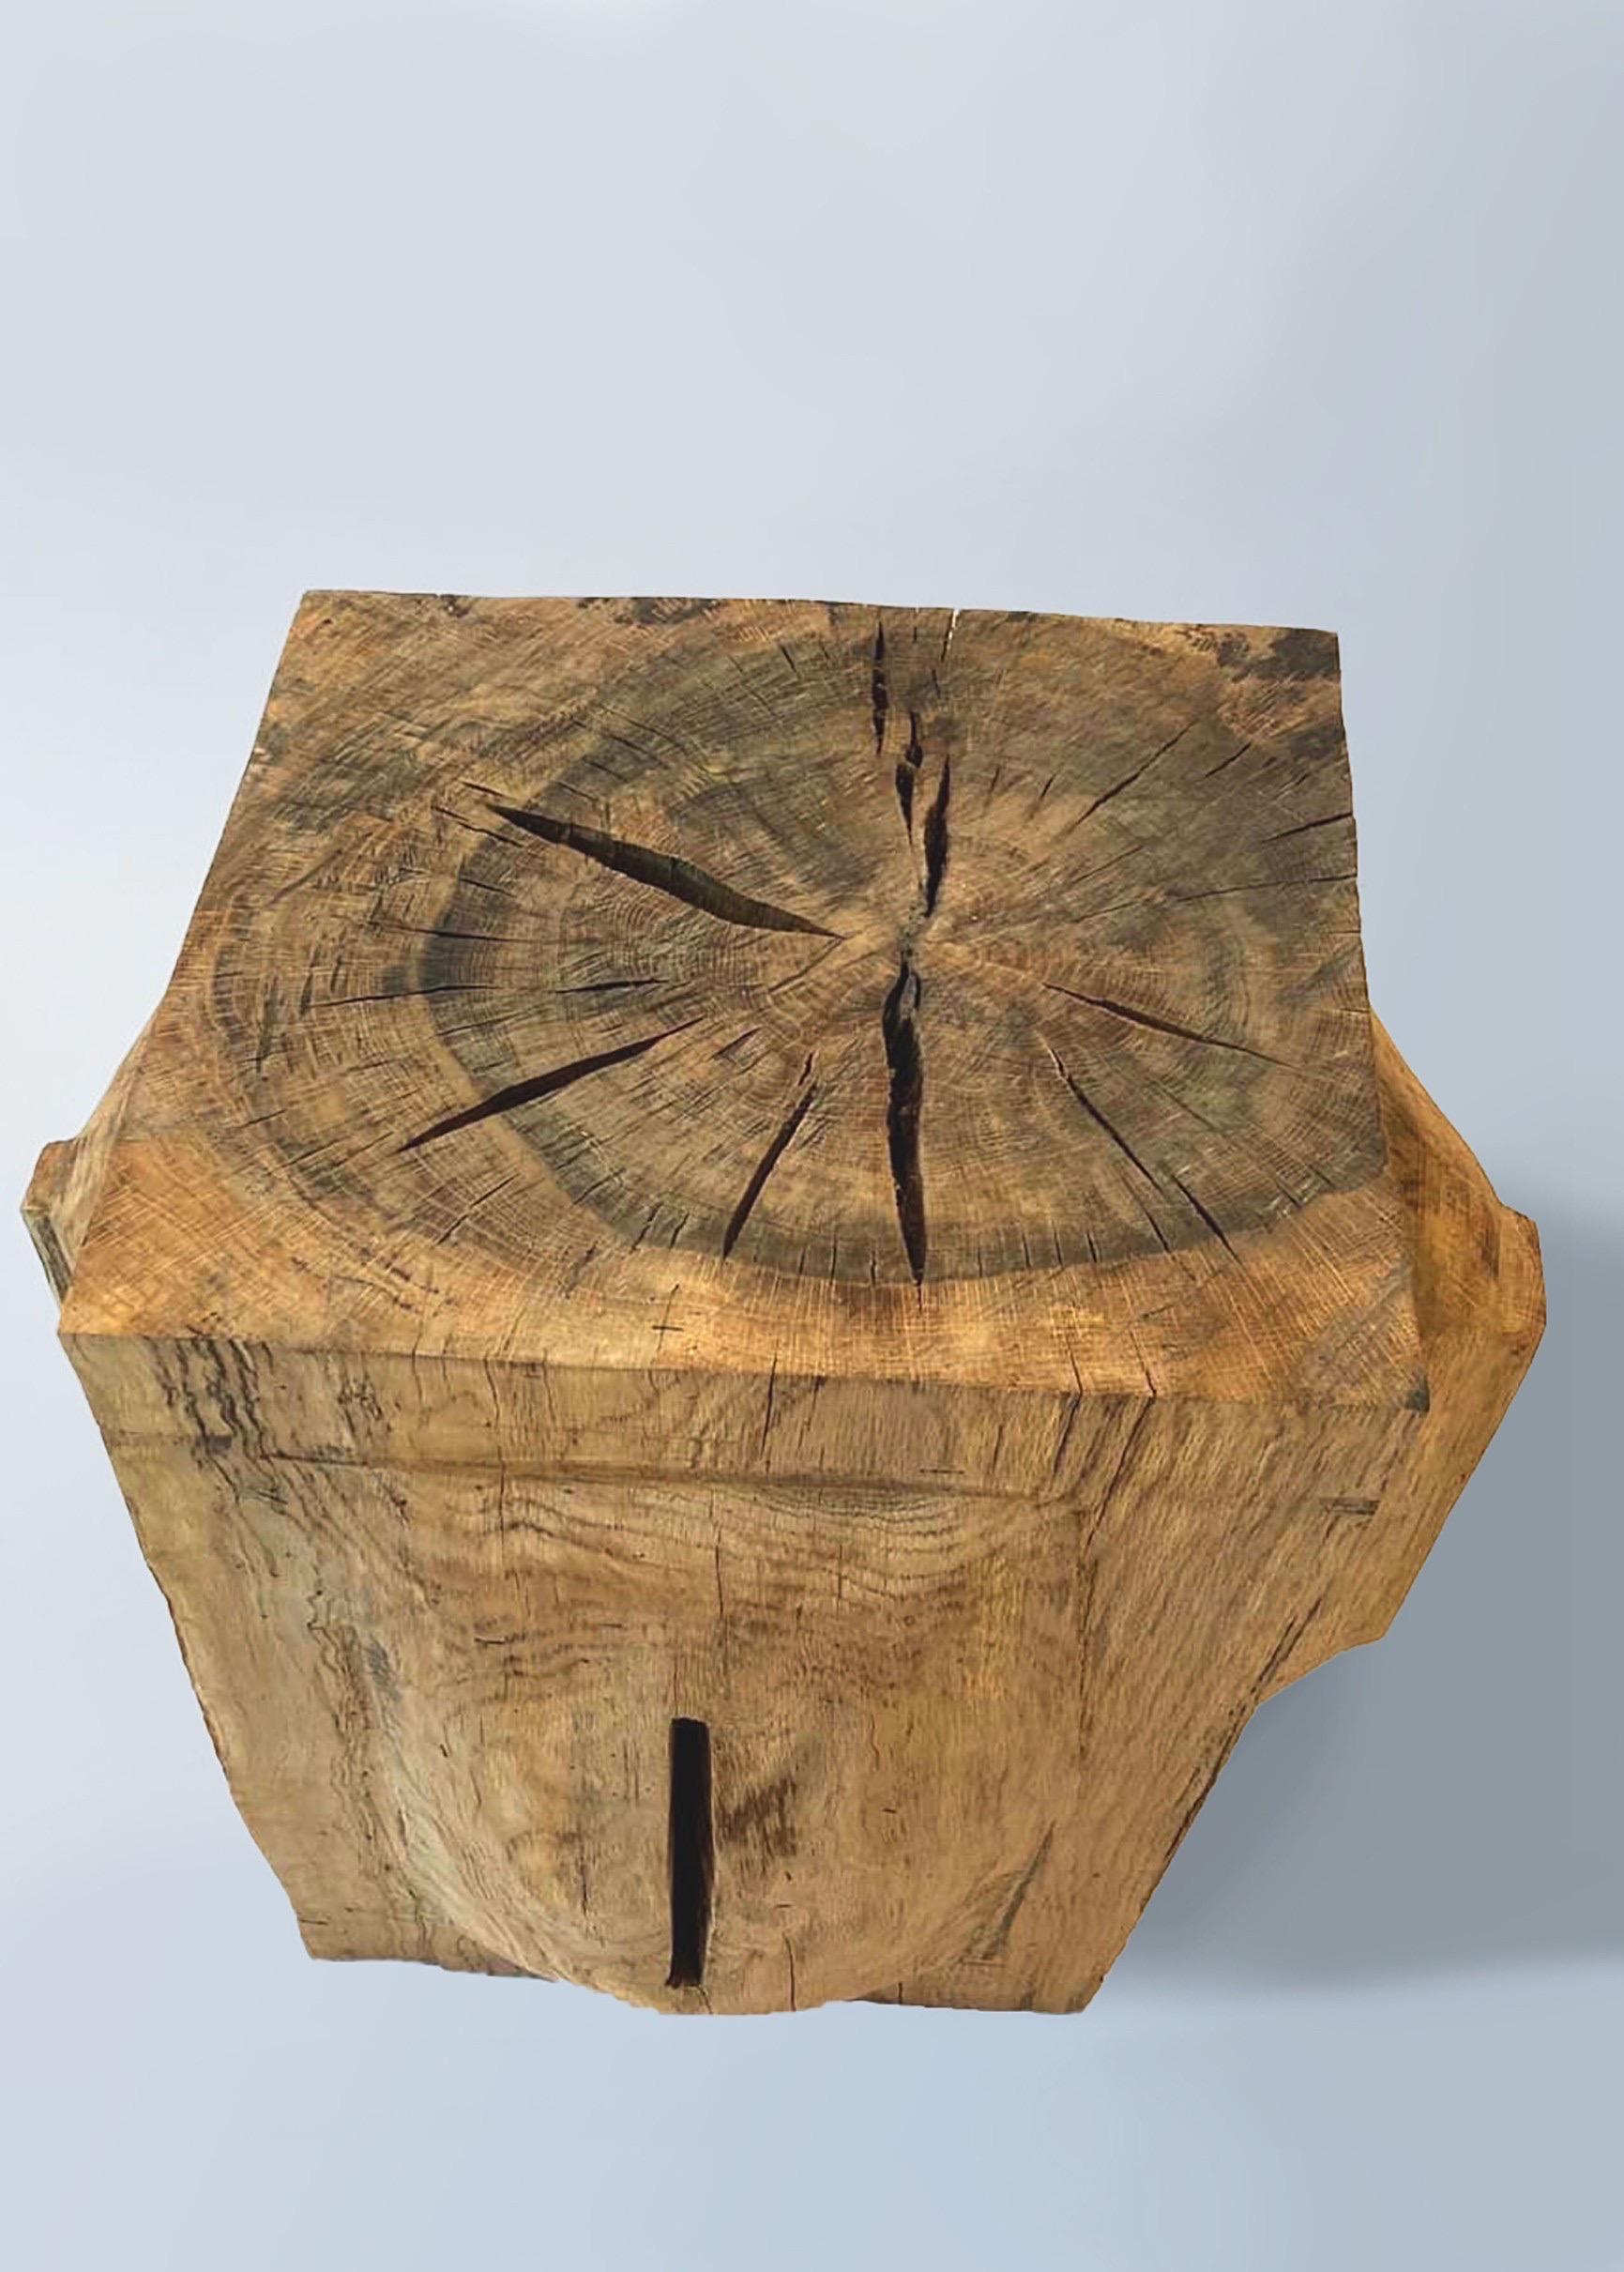 Contemporary Hiroyuki Nishimura Zougei Sculptural Side Table Stool 33 Tribal Glamping For Sale